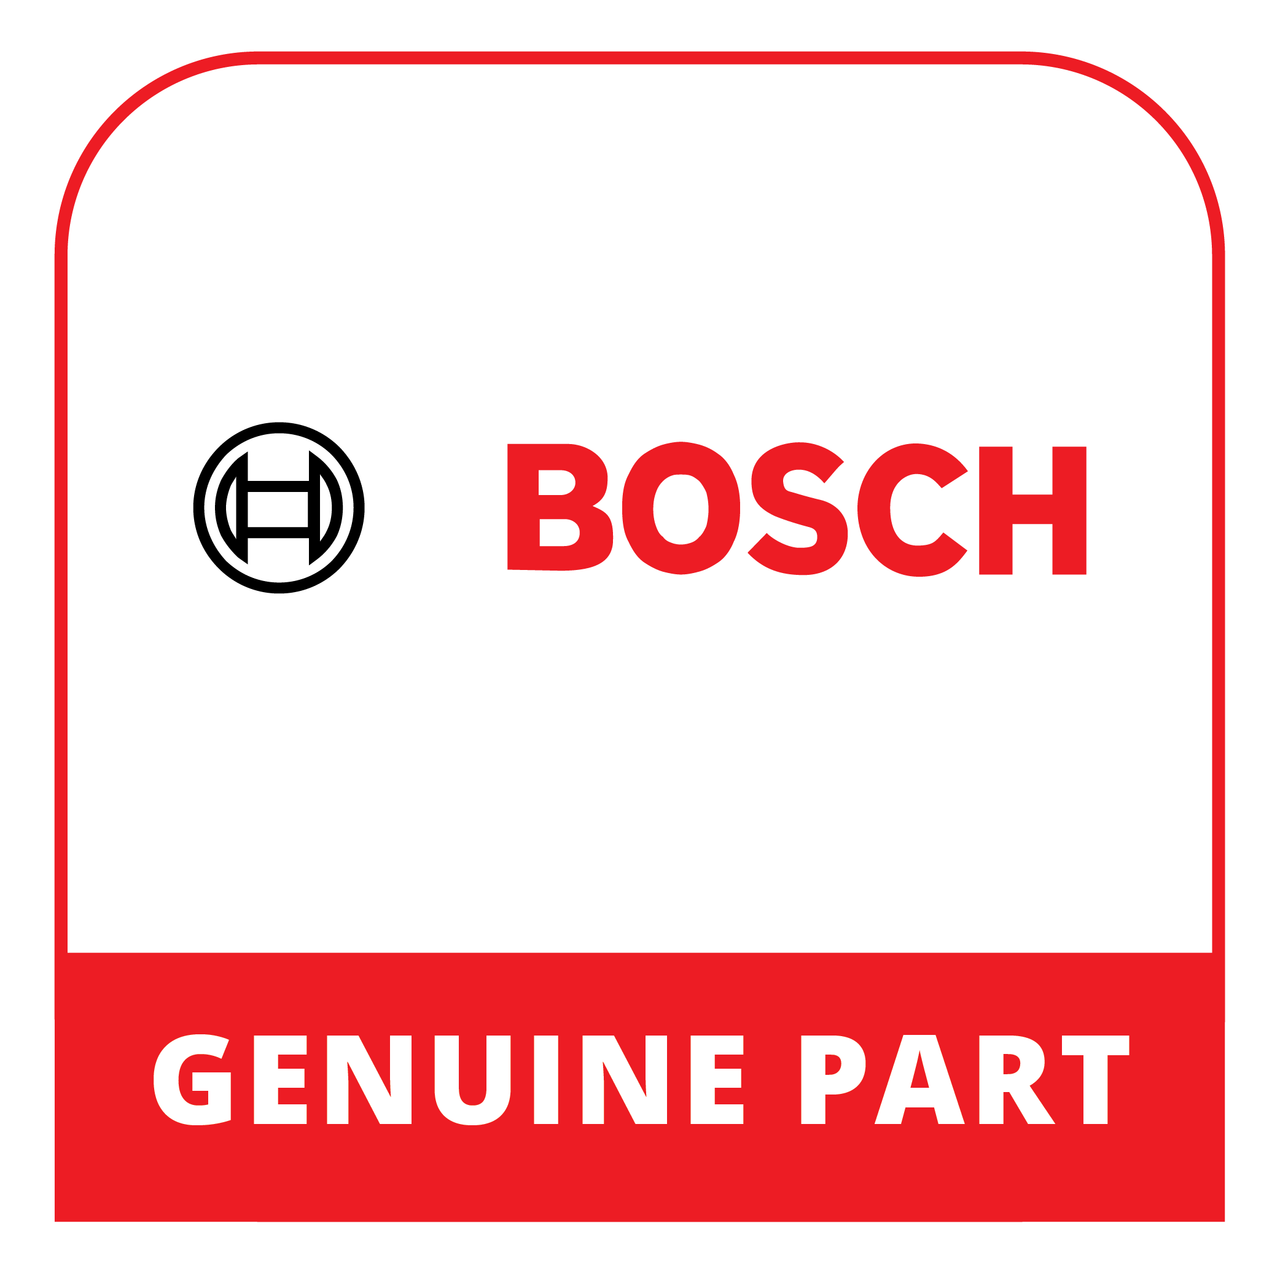 Bosch (Thermador) 20002174 - Drawer - Genuine Bosch (Thermador) Part